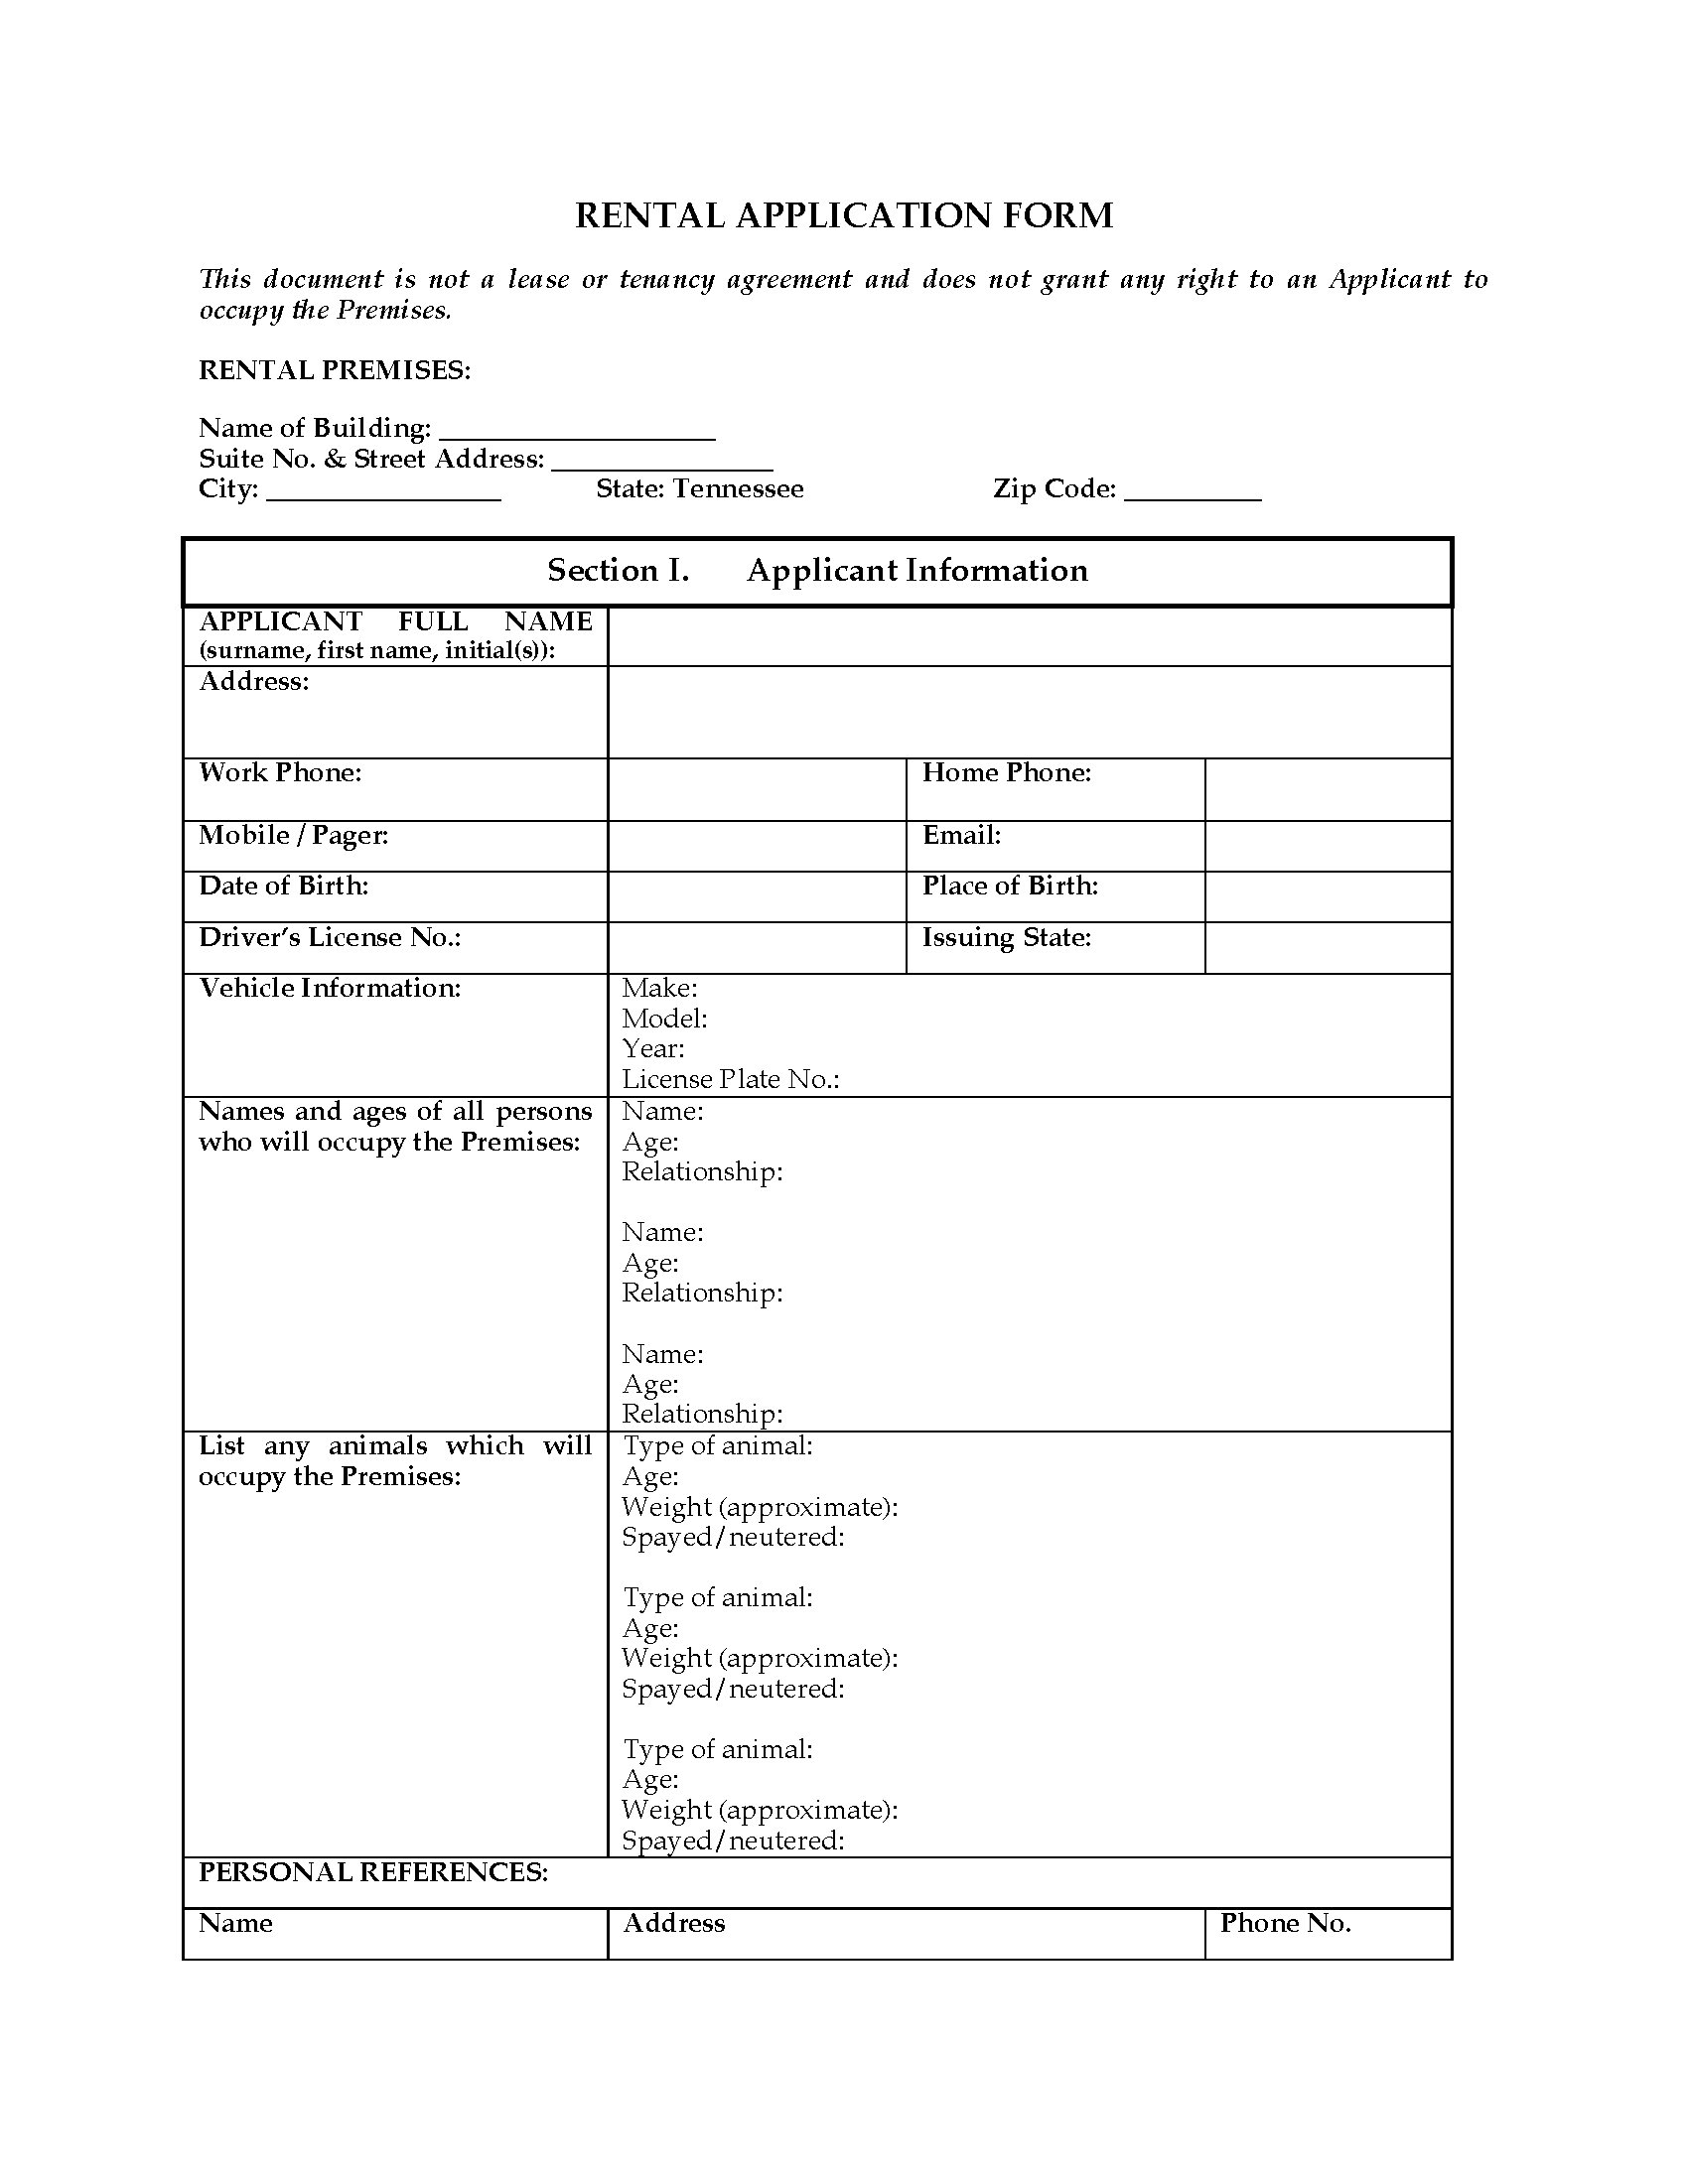 tennessee-rental-application-form-legal-forms-and-business-templates